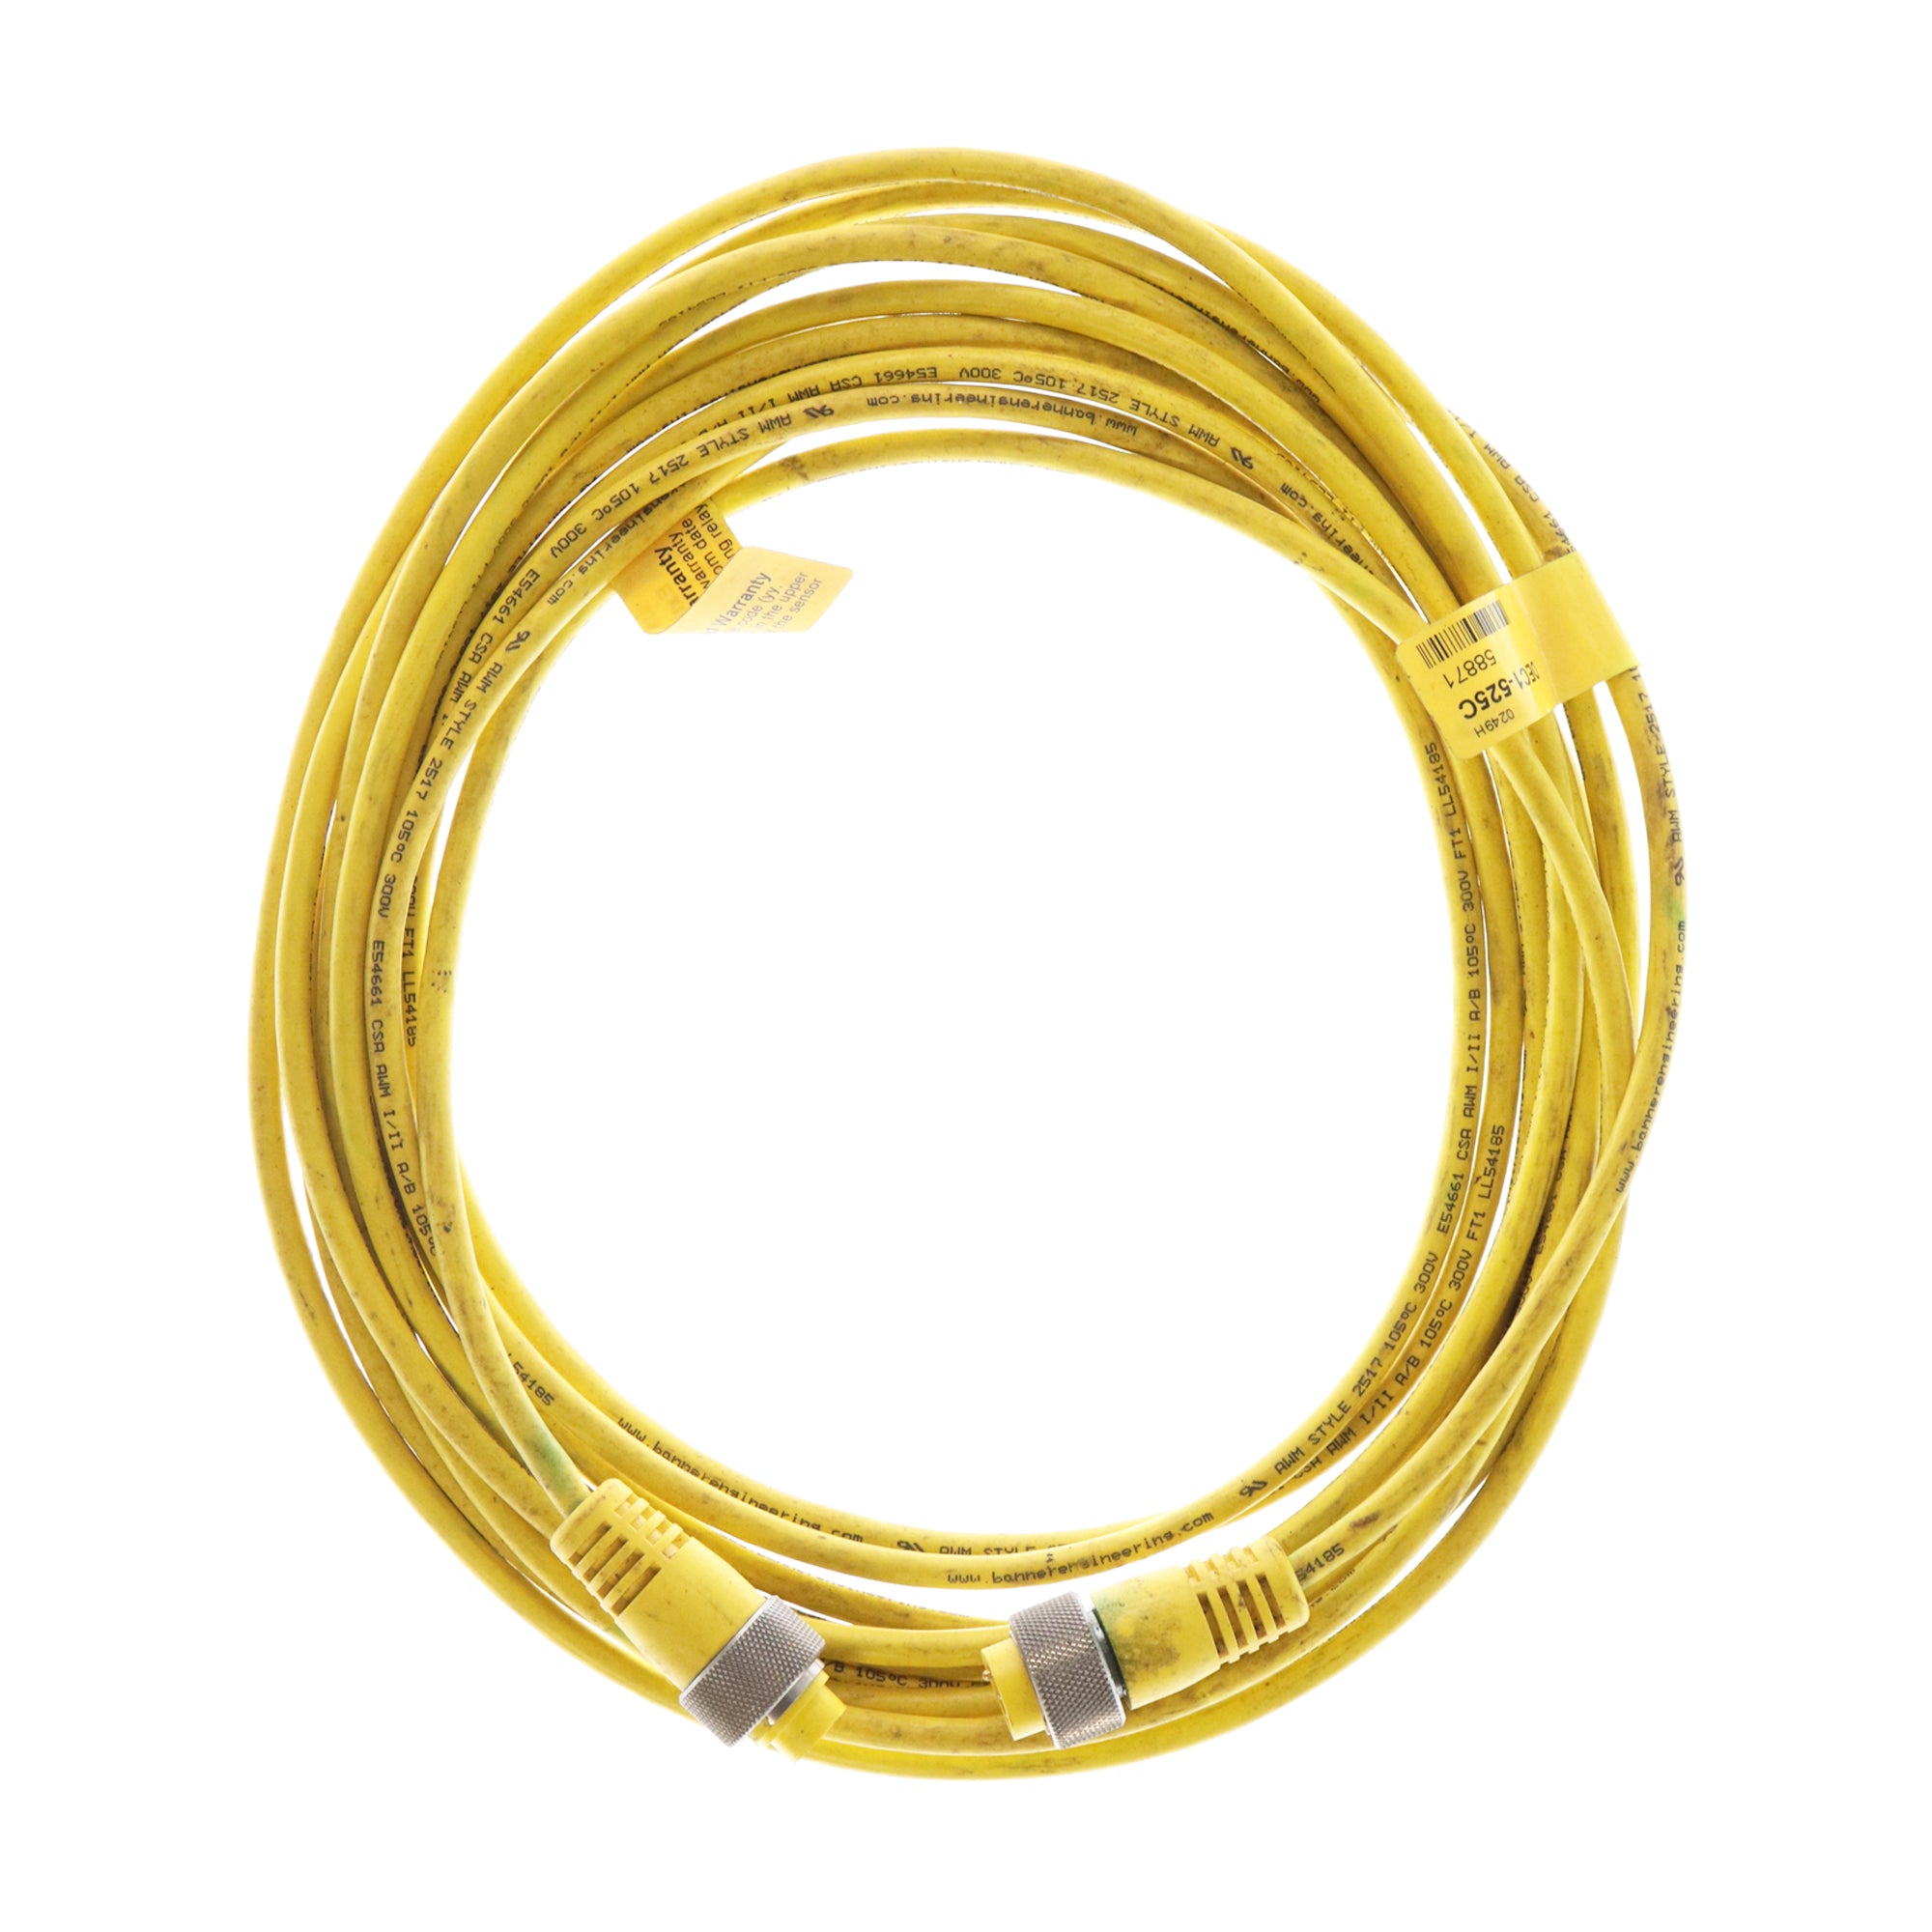 Banner, BANNER 58871 DEC1-525C 5-PIN MALE-FEMALE STRAIGHT CABLE ASSEMBLY, YELLOW